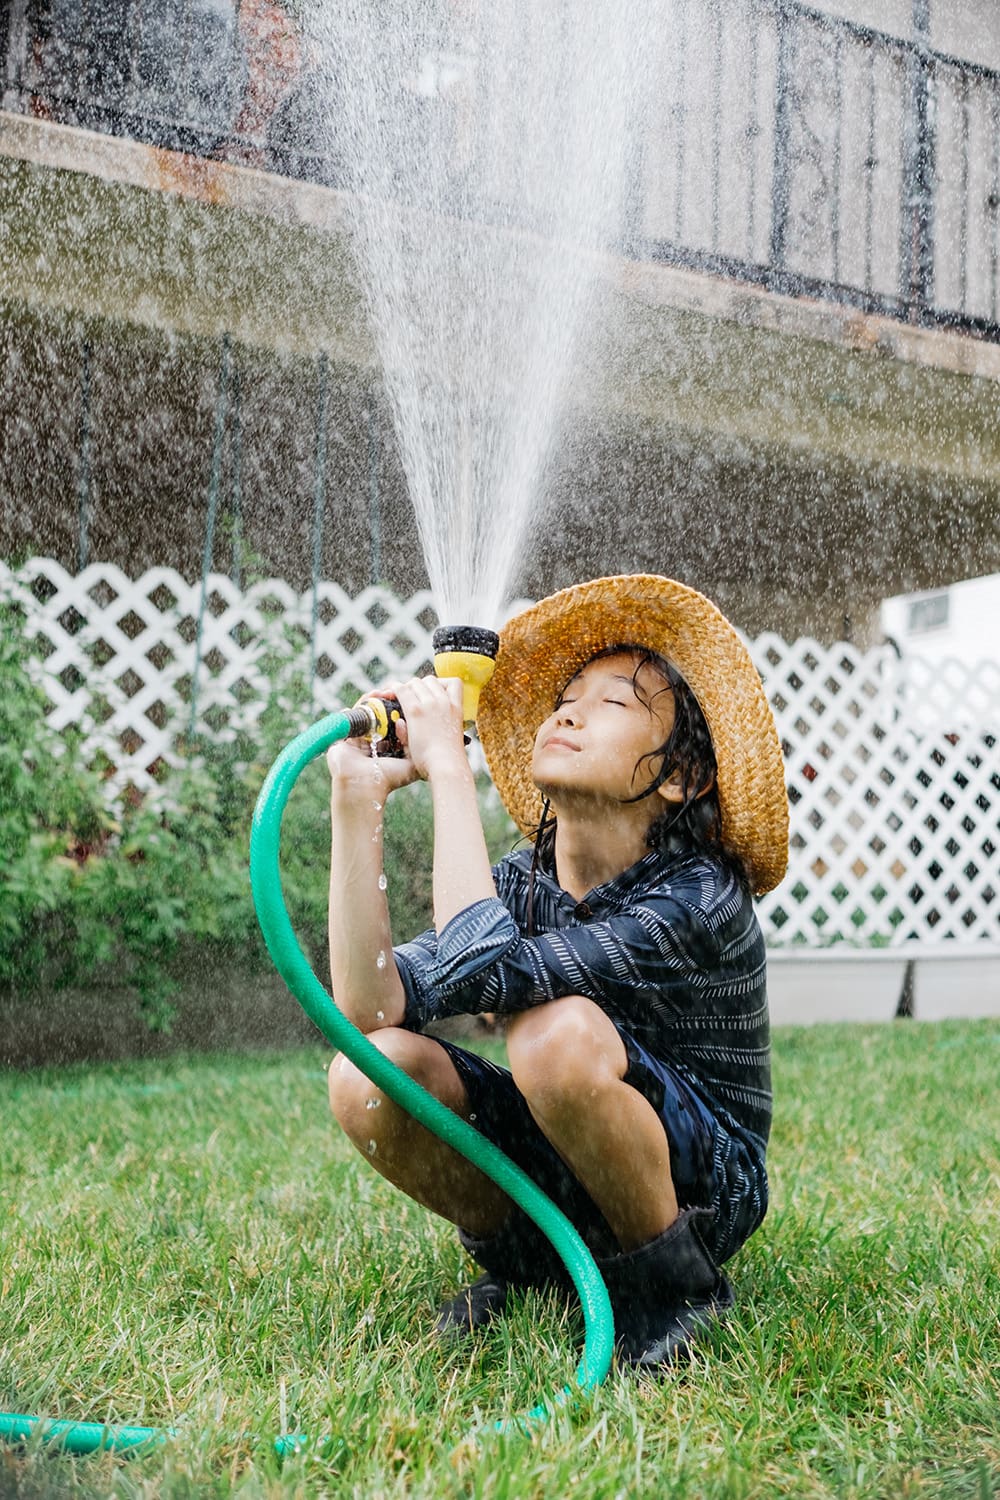 Young Boy Playing With Garden Hose In Backyard